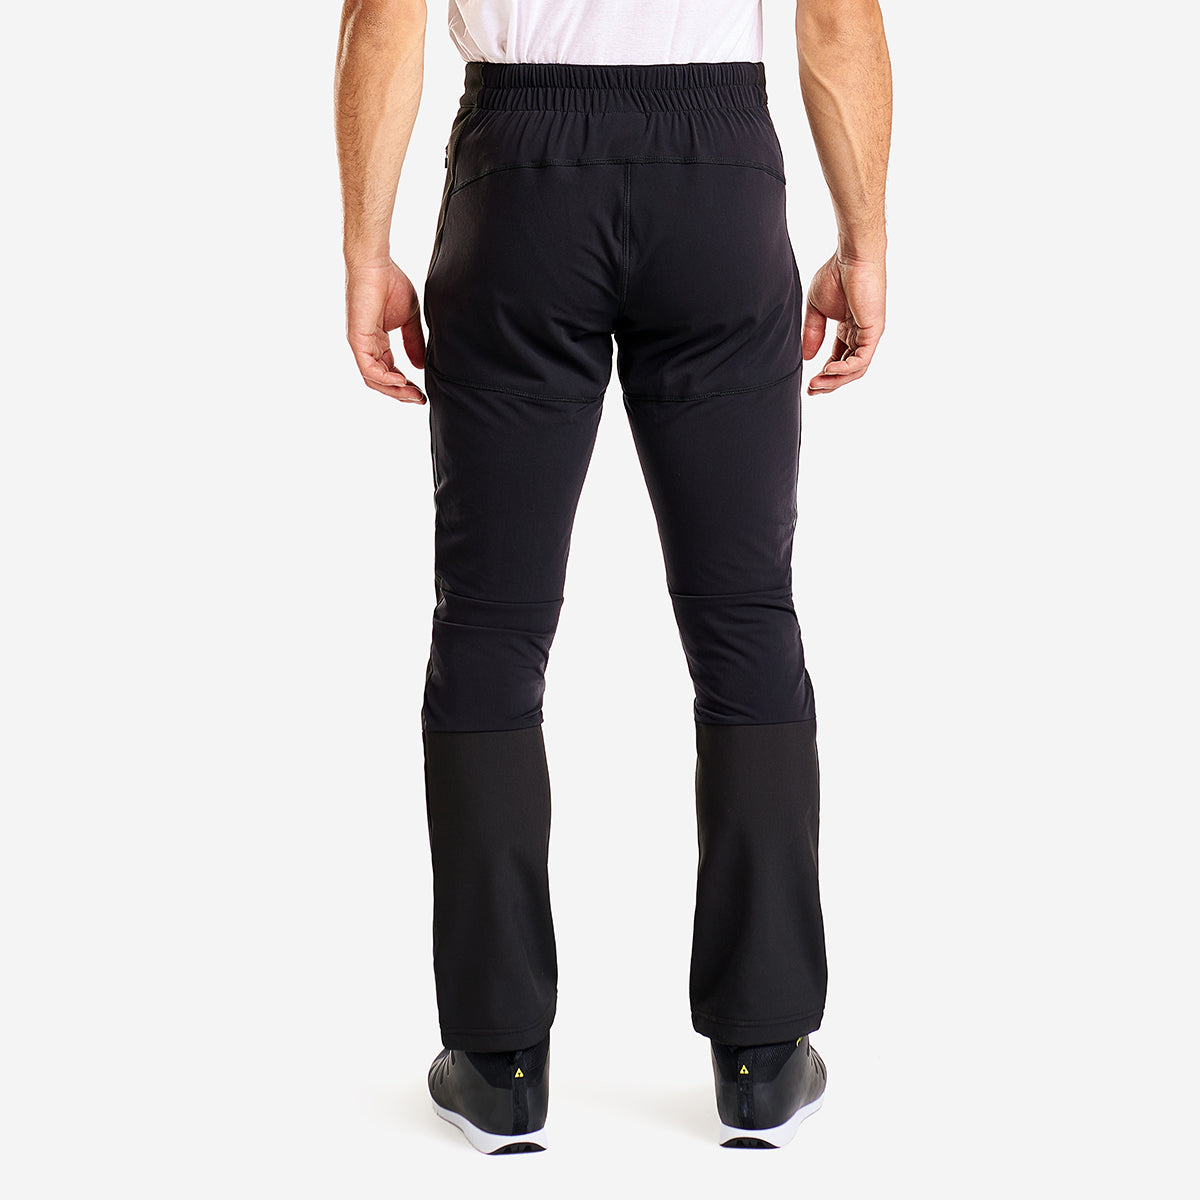 CORVARA - PANTALONS COQUILLE SOUPLE HOMMES